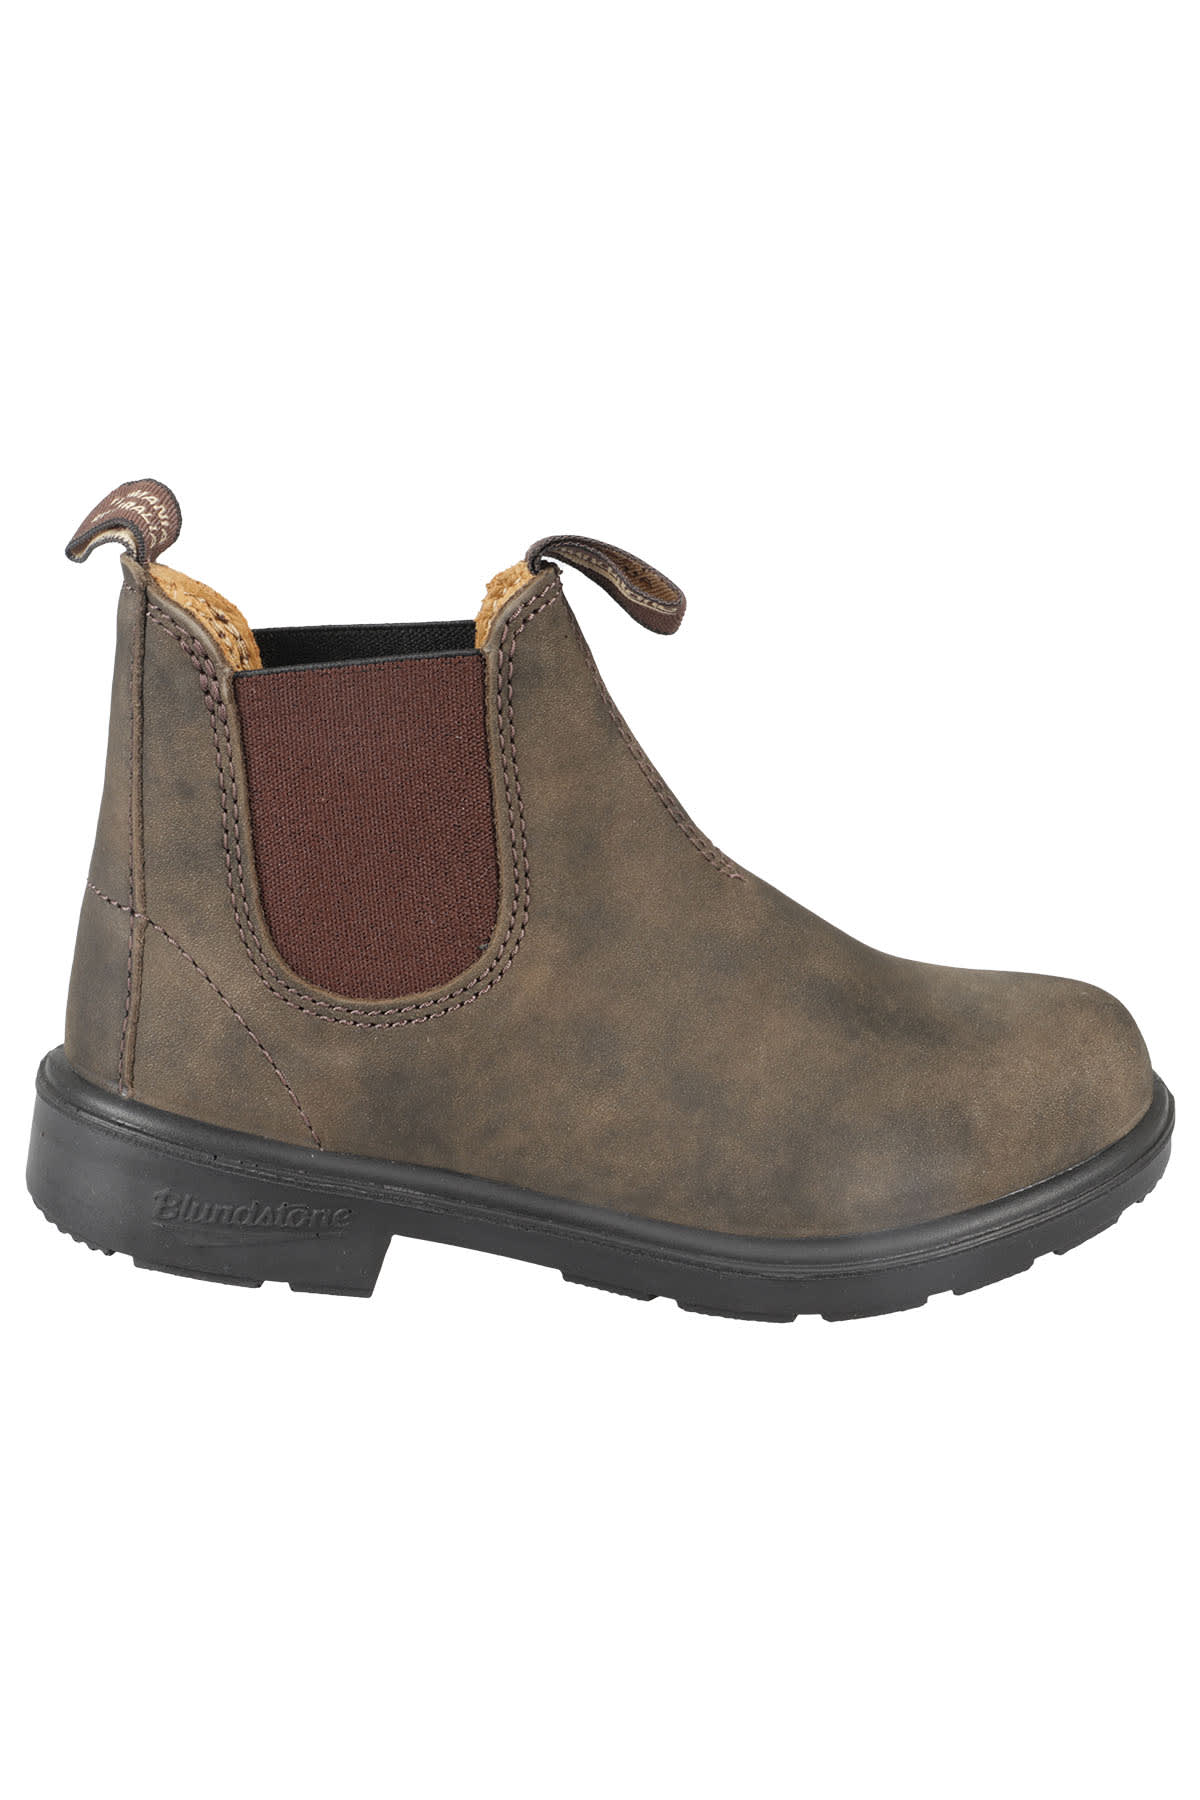 Blundstone Shoes